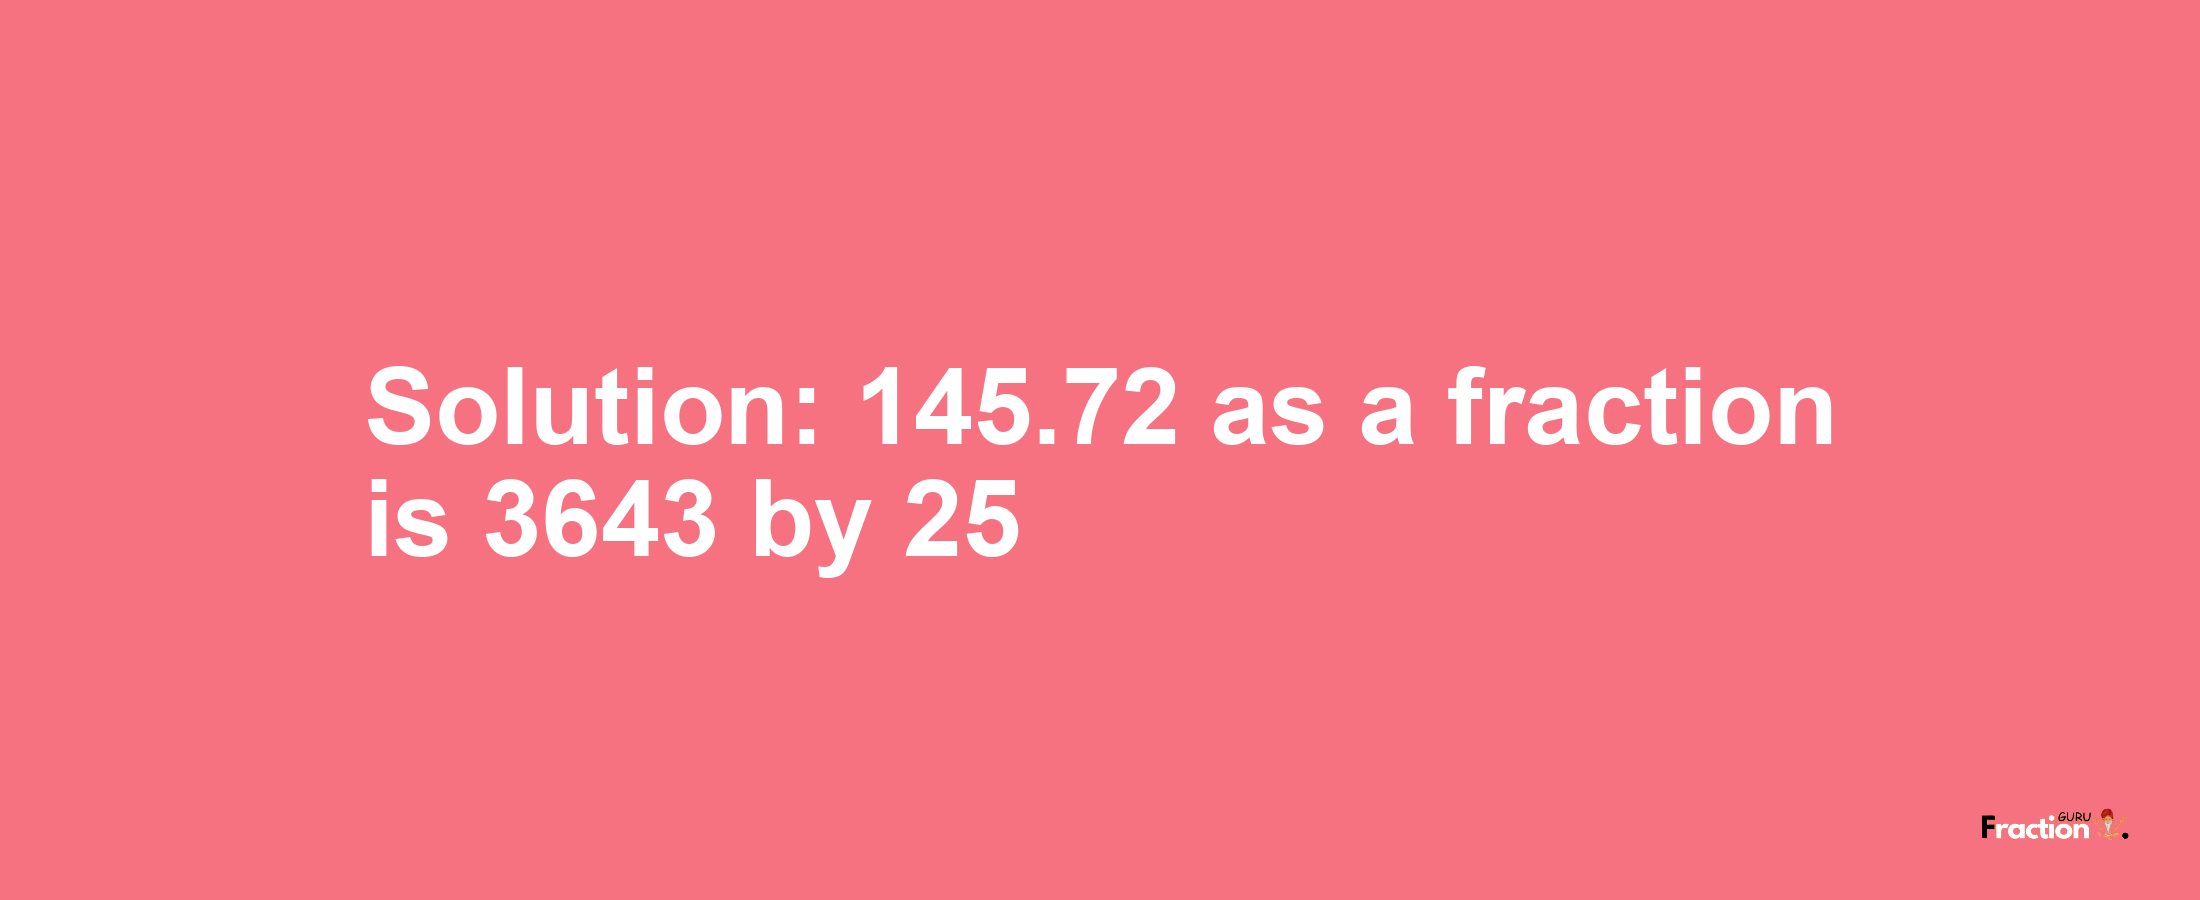 Solution:145.72 as a fraction is 3643/25